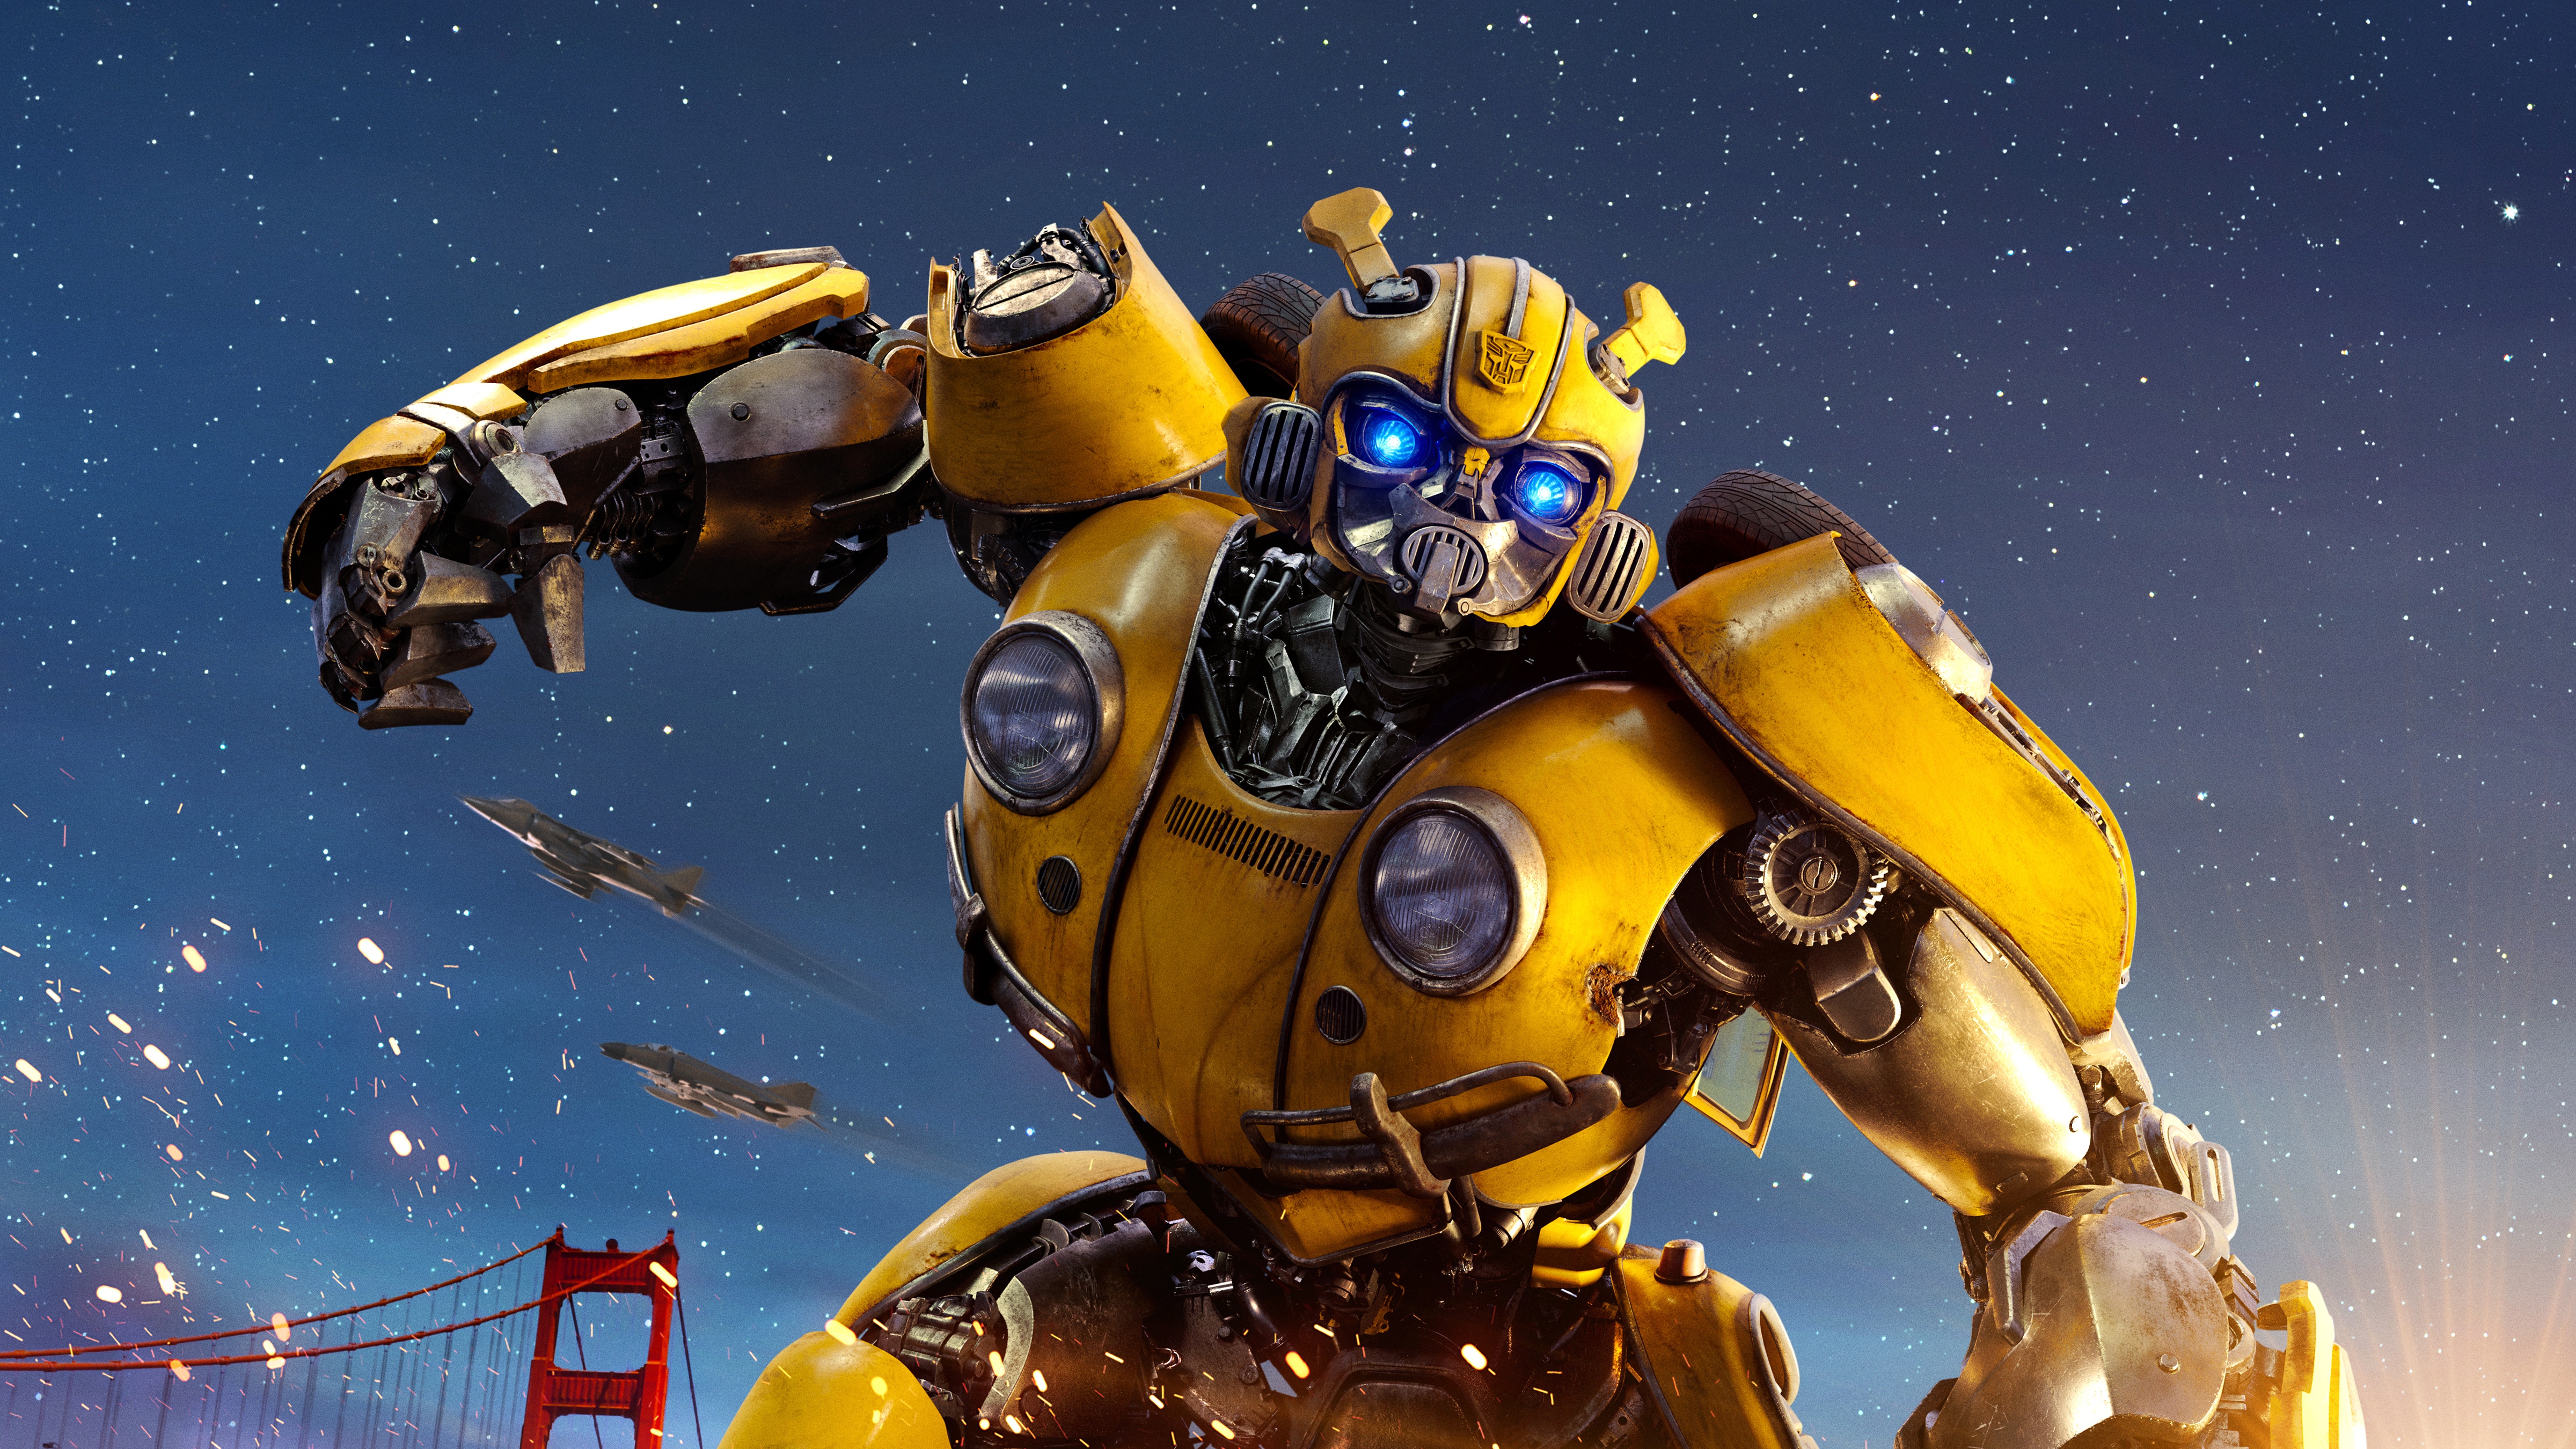 4K Bumblebee (Transformers) Wallpaper and Background Image